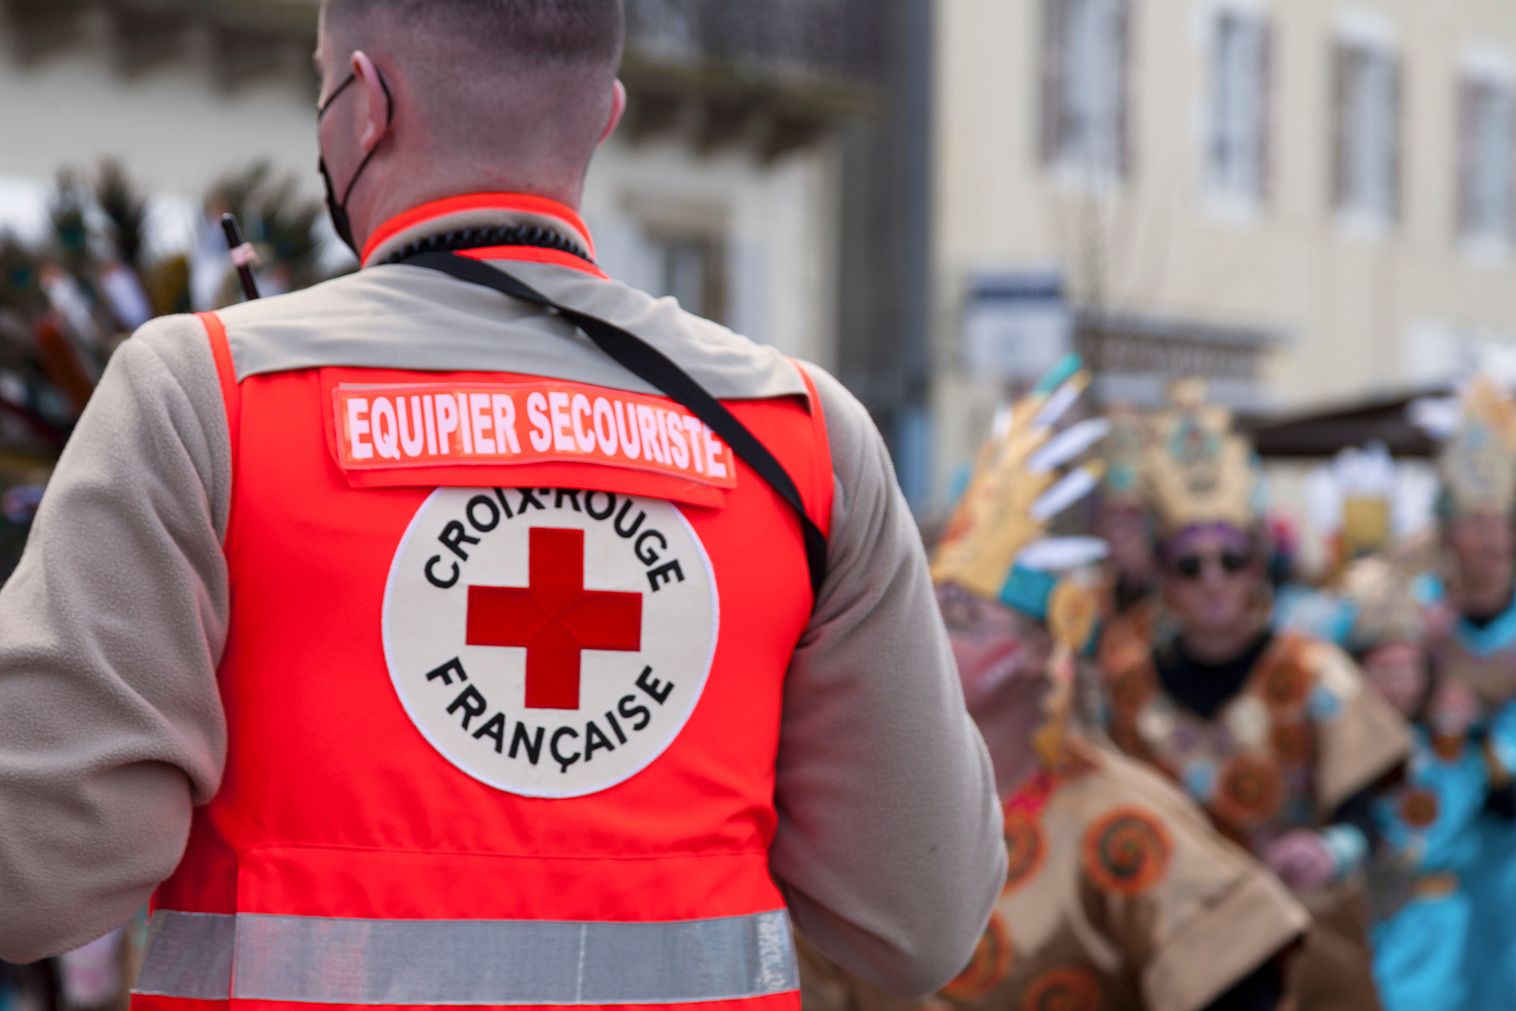 worker from the French red cross